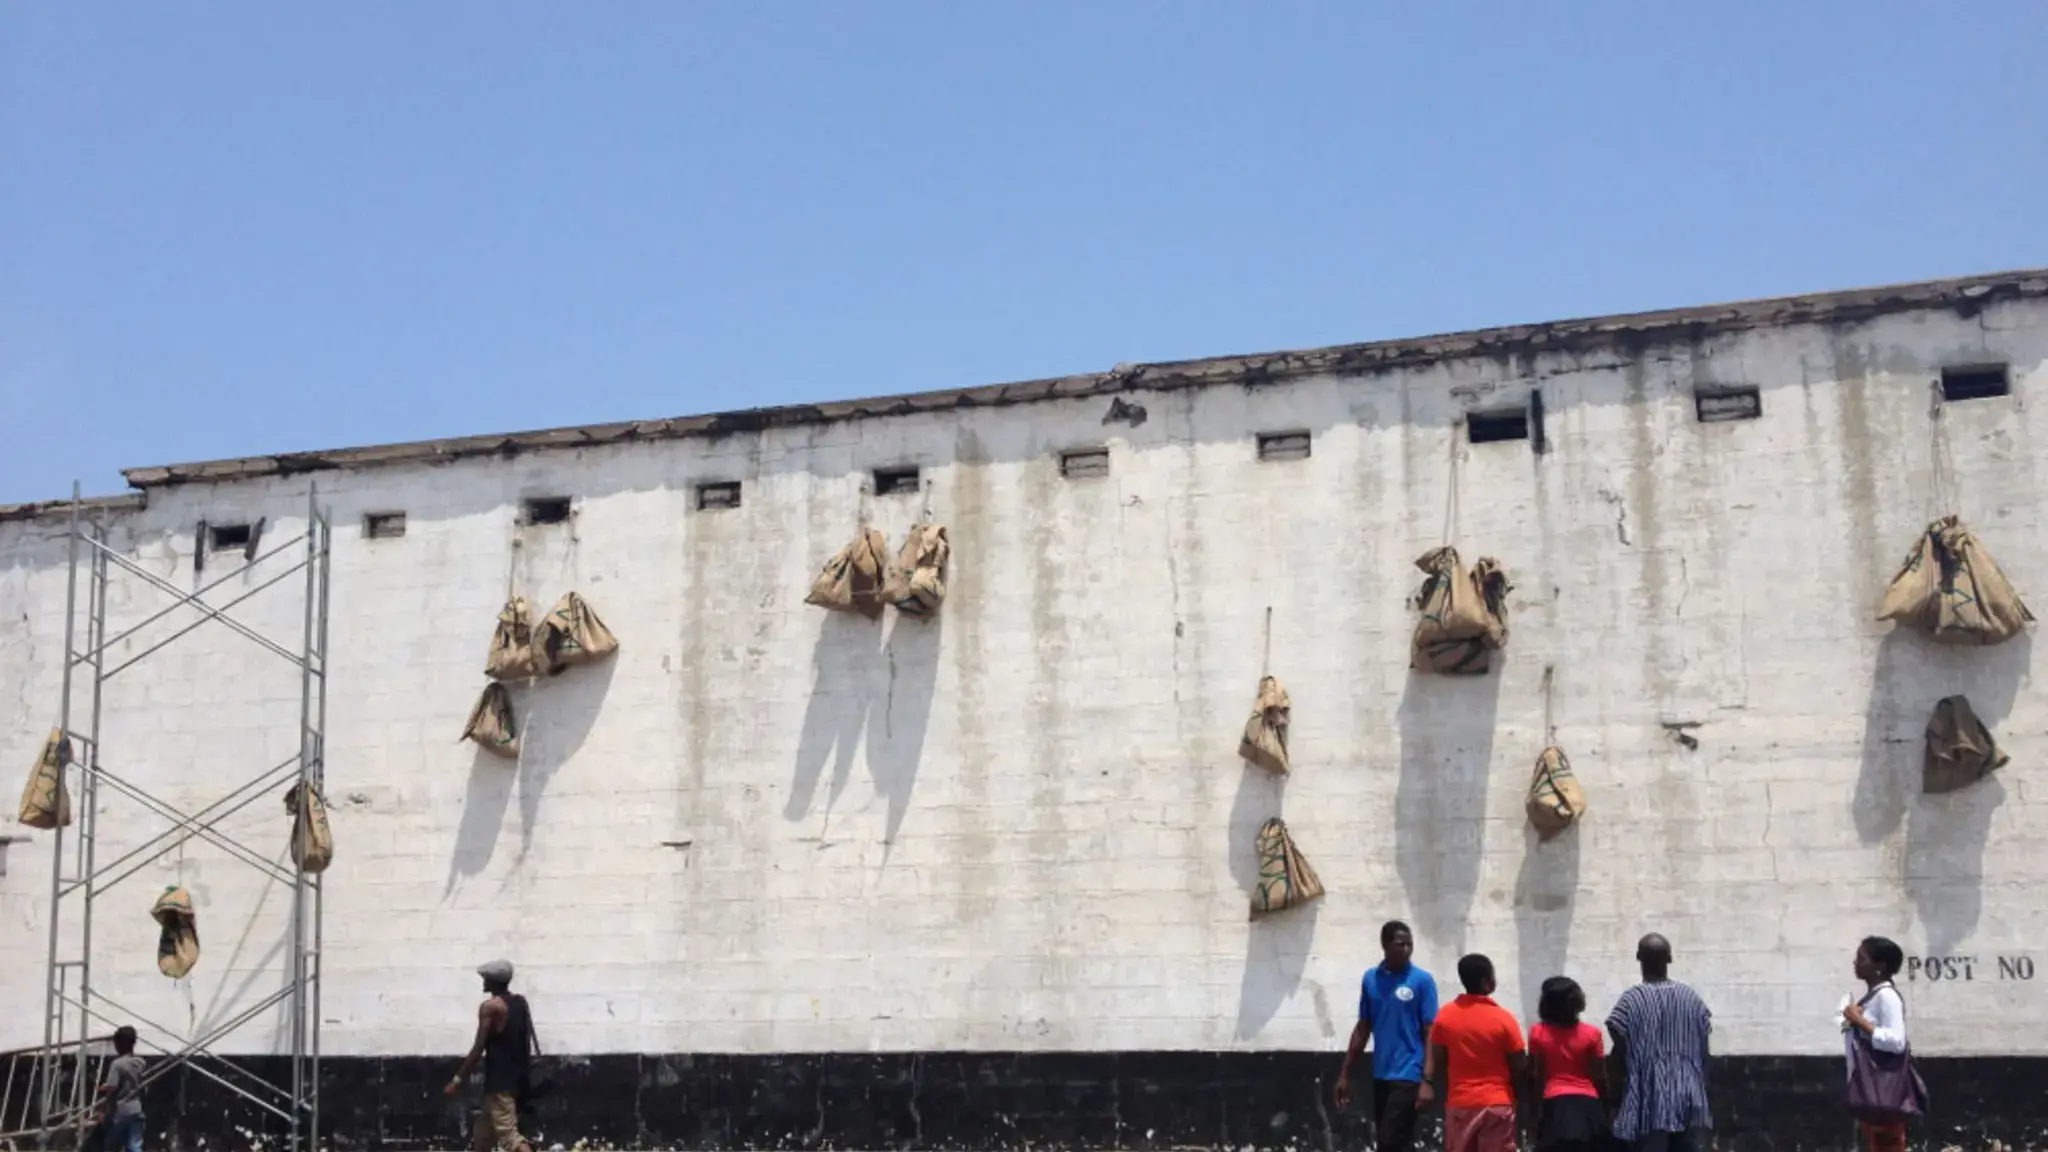 Kwasi Ohene-Ayeh, Six and Fours, Prison Anxieties, interactive, public installation created for the 2013 Chale Wote Street Arts Festival in Jamestown, Accra. Courtesy of the artist.